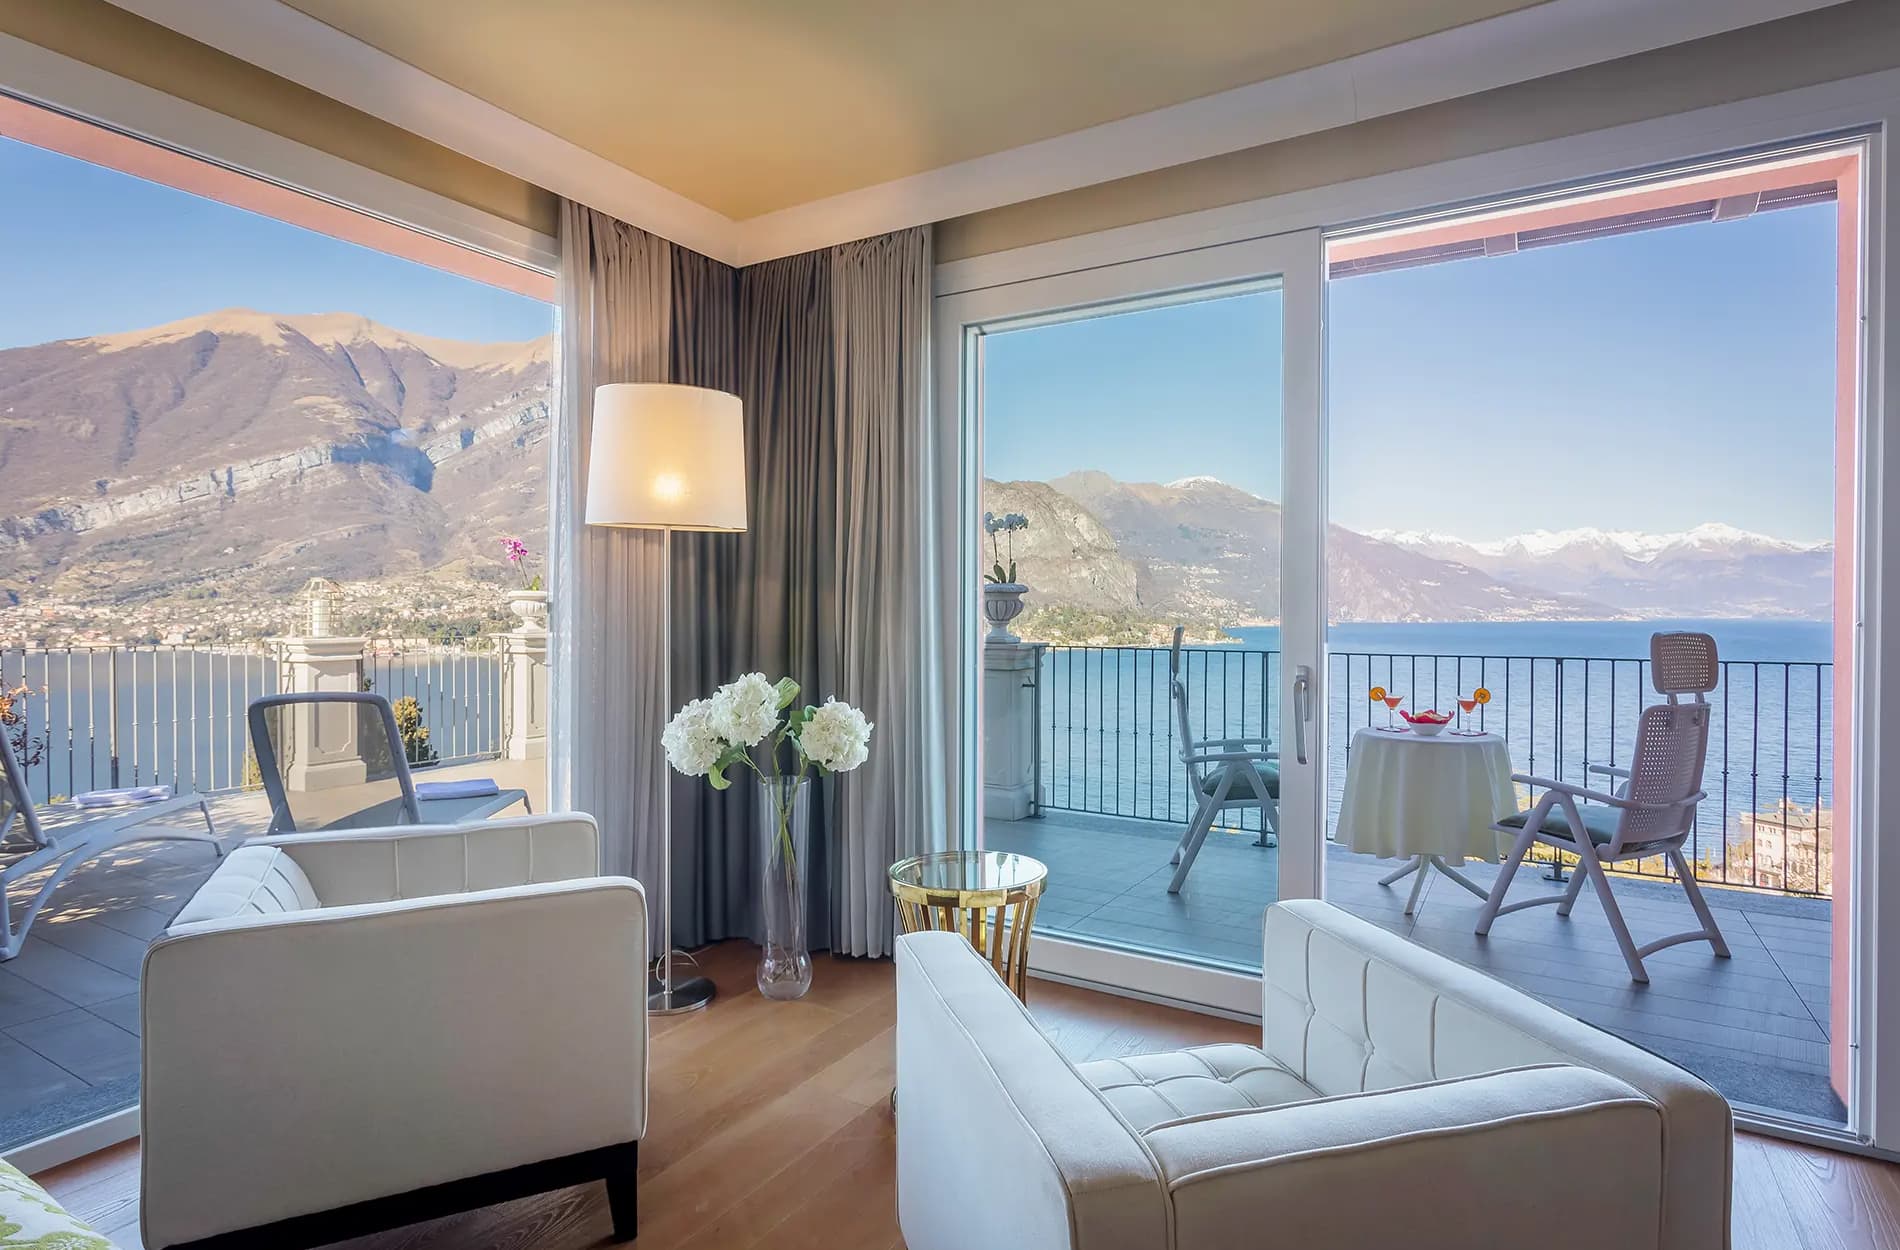 Staying in a Suite with lake views and terrace in Bellagio